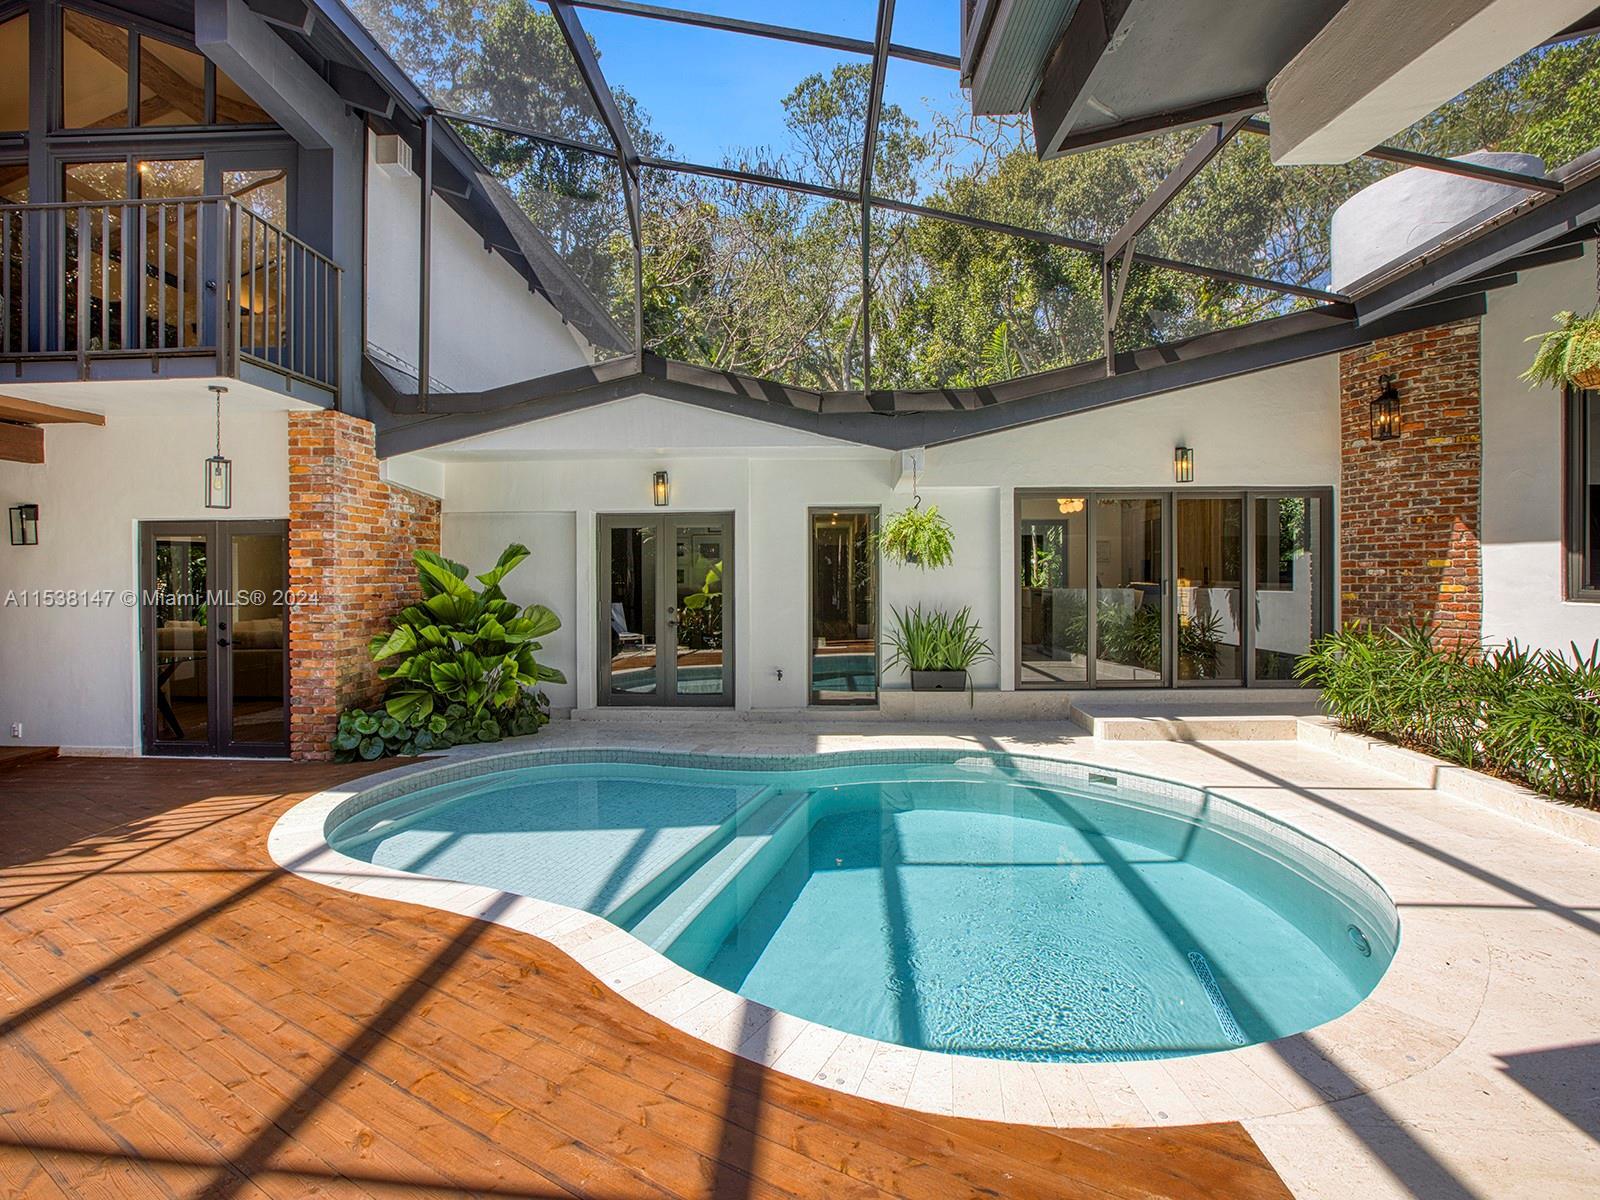 Contemporary haven within the exclusive enclave of Devonwood Pinecrest, this turnkey 5-bedroom 4-bat